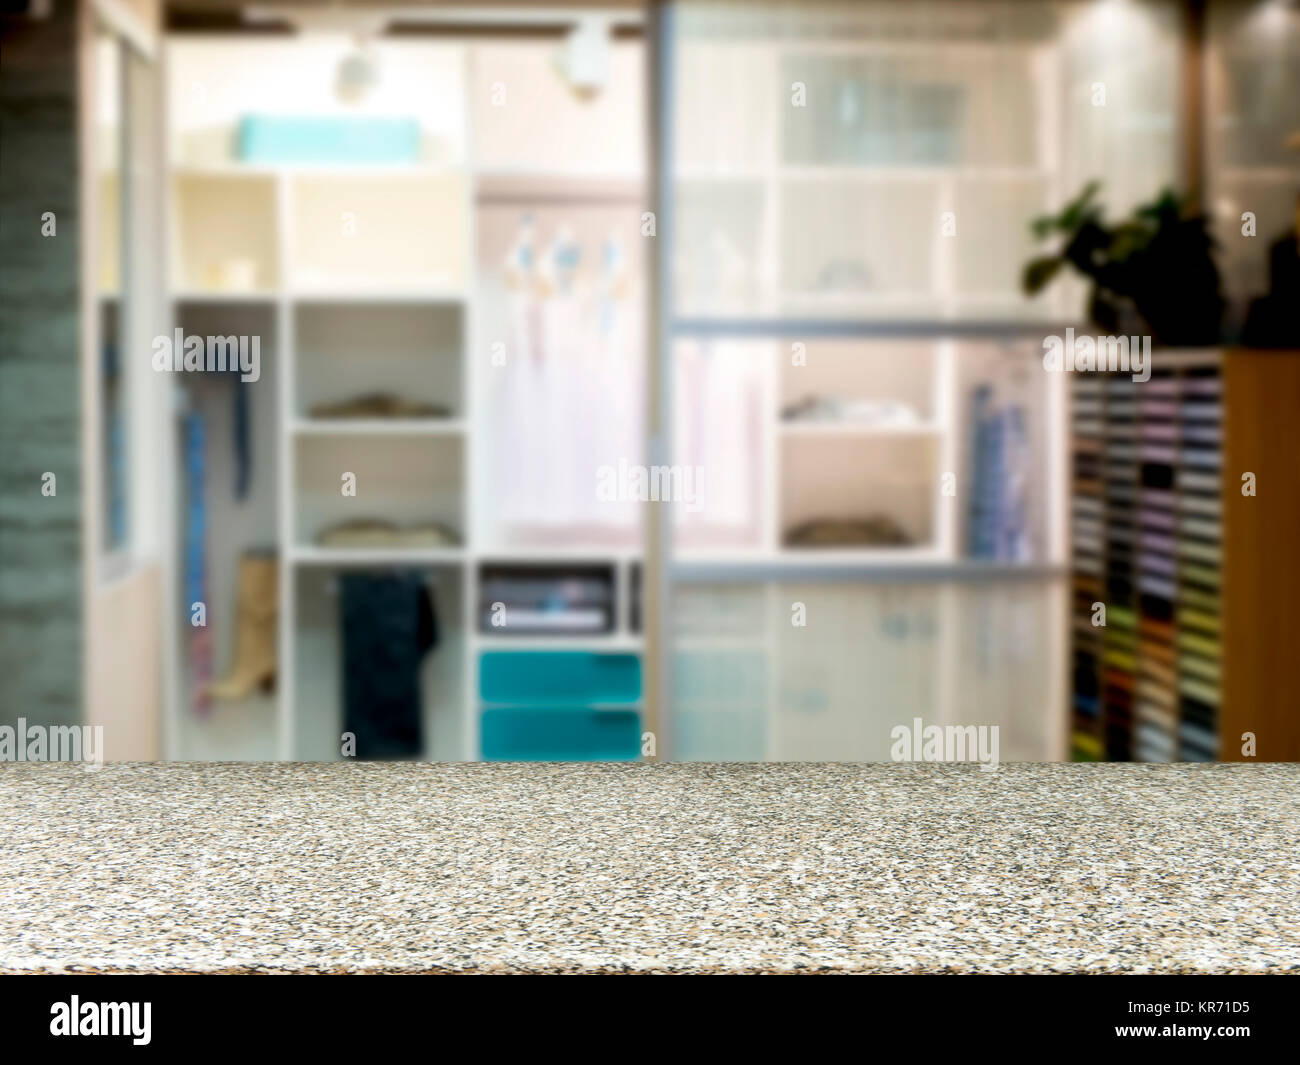 Marble board in front of blurred closet room Stock Photo